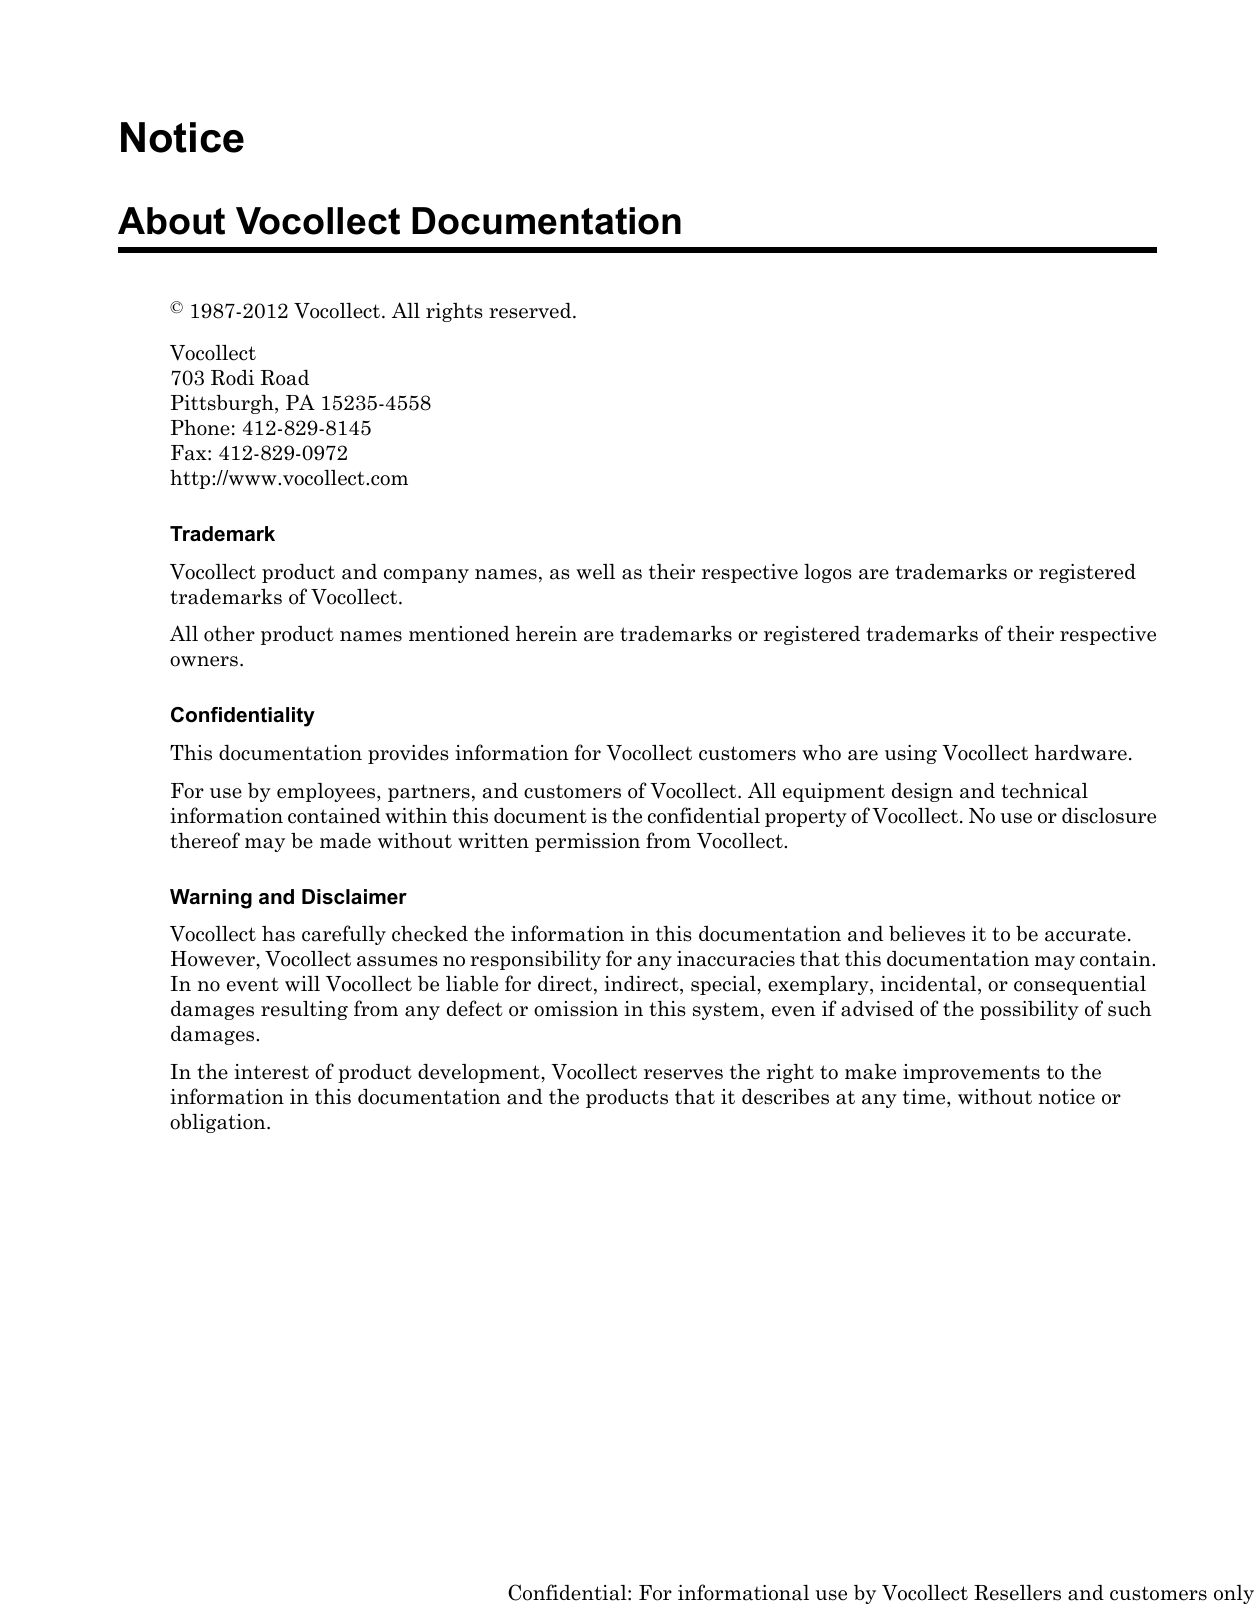 NoticeAbout Vocollect Documentation©1987-2012 Vocollect. All rights reserved.Vocollect703 Rodi RoadPittsburgh, PA 15235-4558Phone: 412-829-8145Fax: 412-829-0972http://www.vocollect.comTrademarkVocollect product and company names, as well as their respective logos are trademarks or registeredtrademarks of Vocollect.All other product names mentioned herein are trademarks or registered trademarks of their respectiveowners.ConfidentialityThis documentation provides information for Vocollect customers who are using Vocollect hardware.For use by employees, partners, and customers of Vocollect. All equipment design and technicalinformation contained within this document is the confidential property of Vocollect. No use or disclosurethereof may be made without written permission from Vocollect.Warning and DisclaimerVocollect has carefully checked the information in this documentation and believes it to be accurate.However, Vocollect assumes no responsibility for any inaccuracies that this documentation may contain.In no event will Vocollect be liable for direct, indirect, special, exemplary, incidental, or consequentialdamages resulting from any defect or omission in this system, even if advised of the possibility of suchdamages.In the interest of product development, Vocollect reserves the right to make improvements to theinformation in this documentation and the products that it describes at any time, without notice orobligation.Confidential: For informational use by Vocollect Resellers and customers only